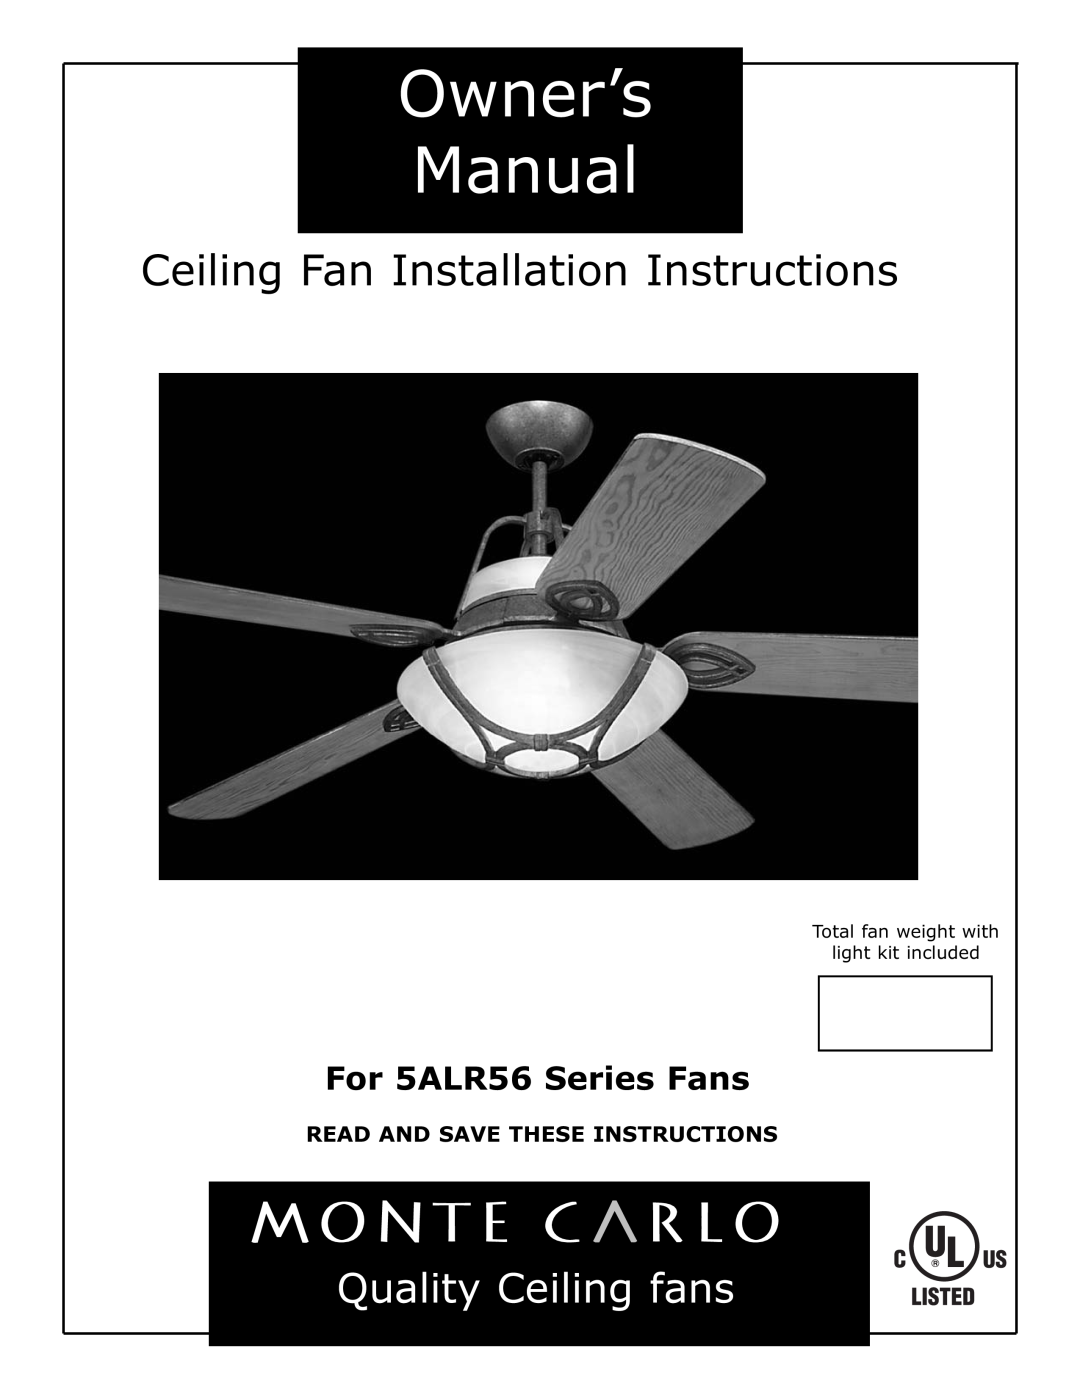 Monte Carlo Fan Company 5ALR56 owner manual Ceiling Fan Installation Instructions, Quality Ceiling fans 